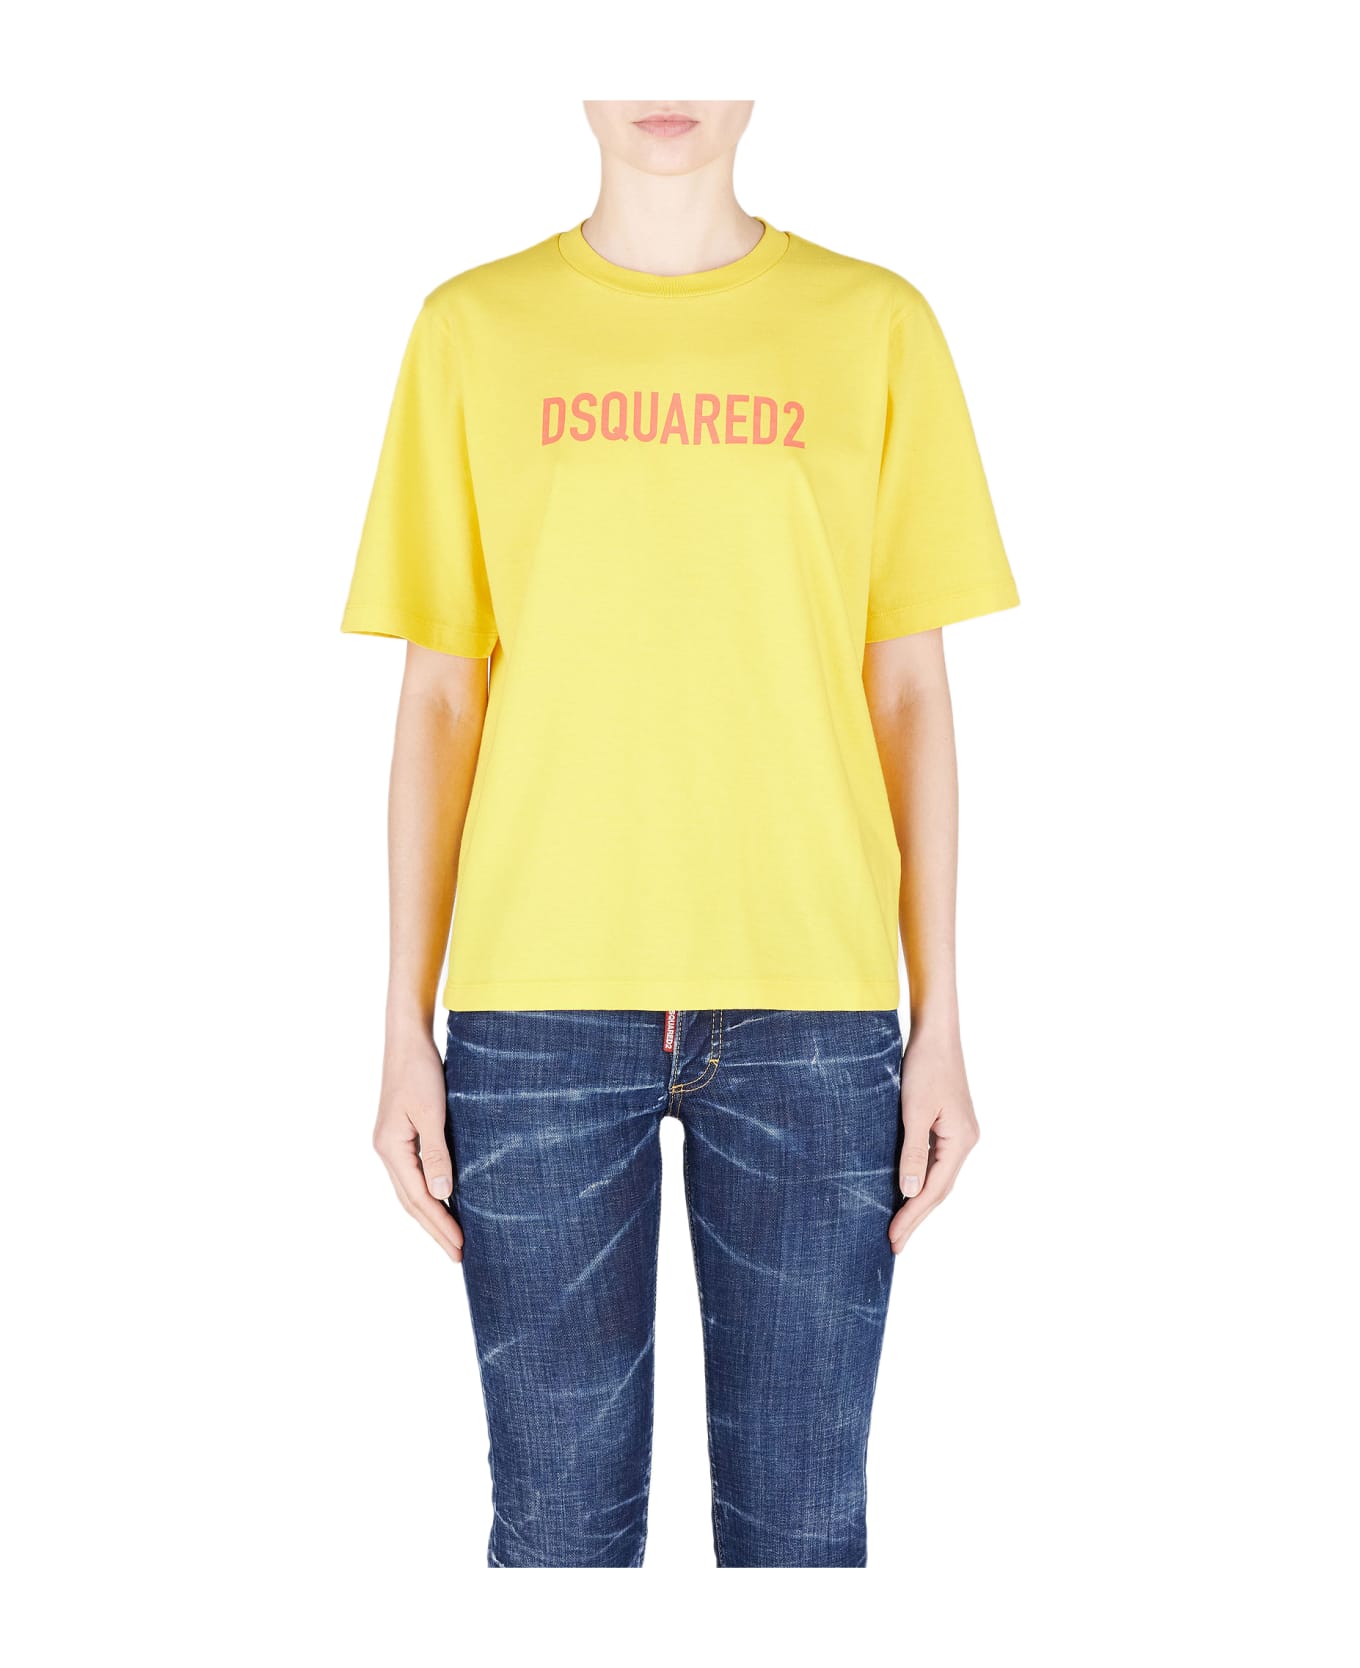 Dsquared2 T-shirts - Cyber yellow Tシャツ